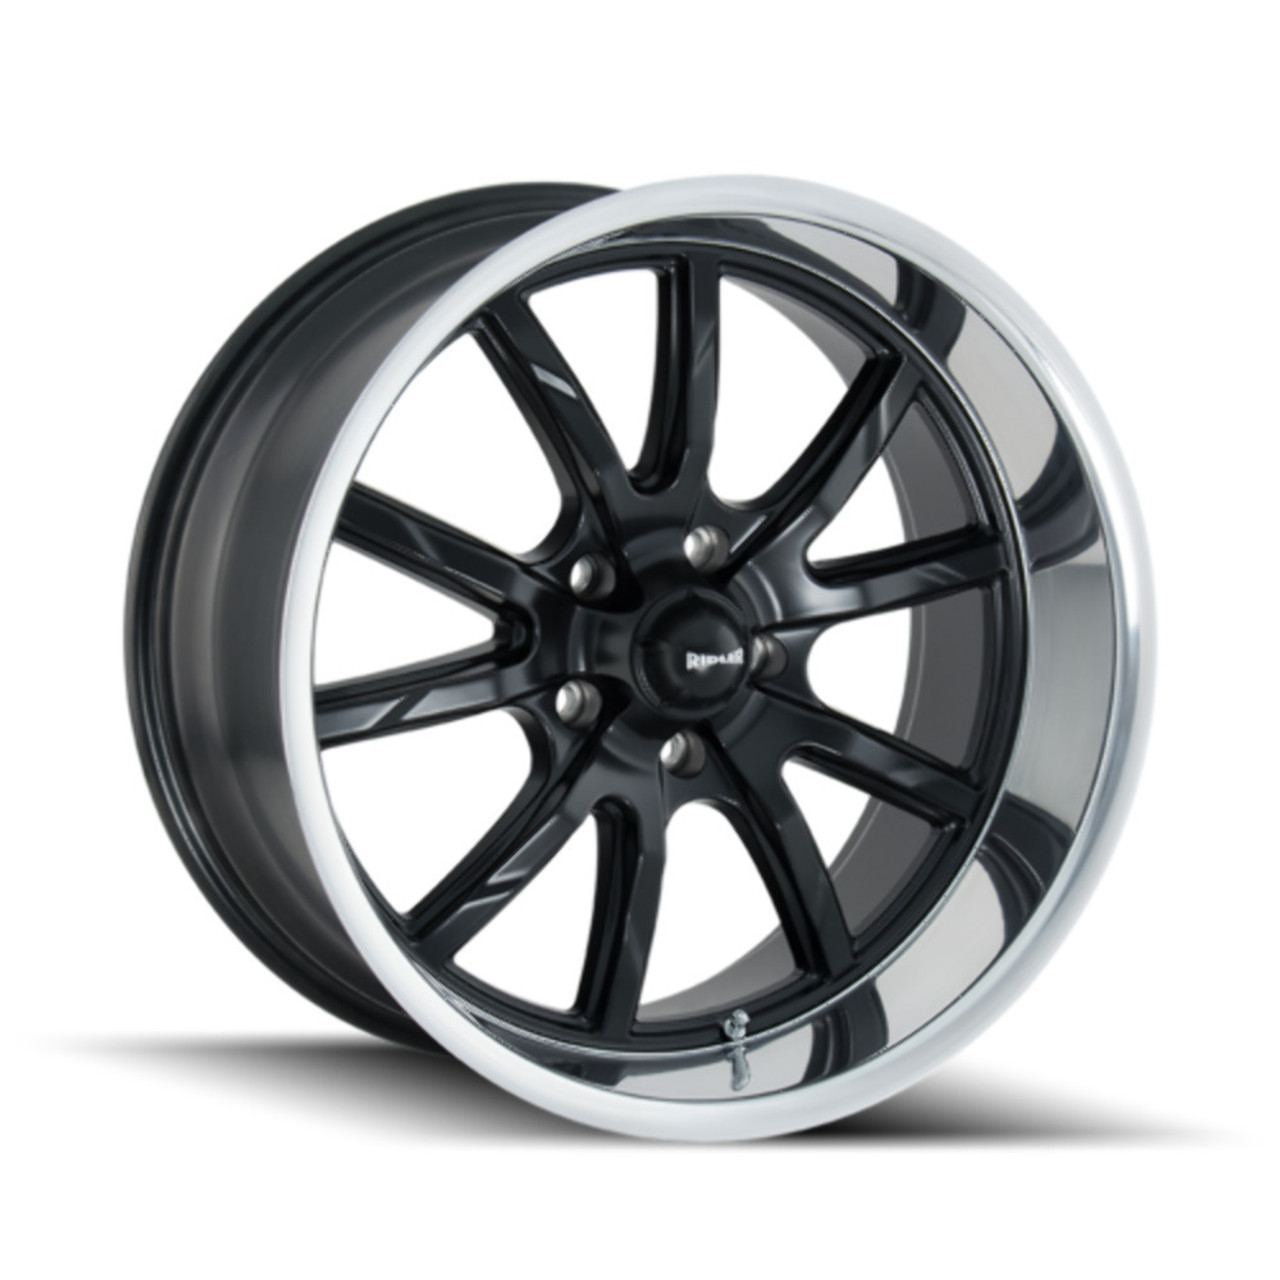 17" Ridler 650 17x7 Matte Black Polished Lip 5x4.5 Wheel 0mm For Ford Jeep Truck